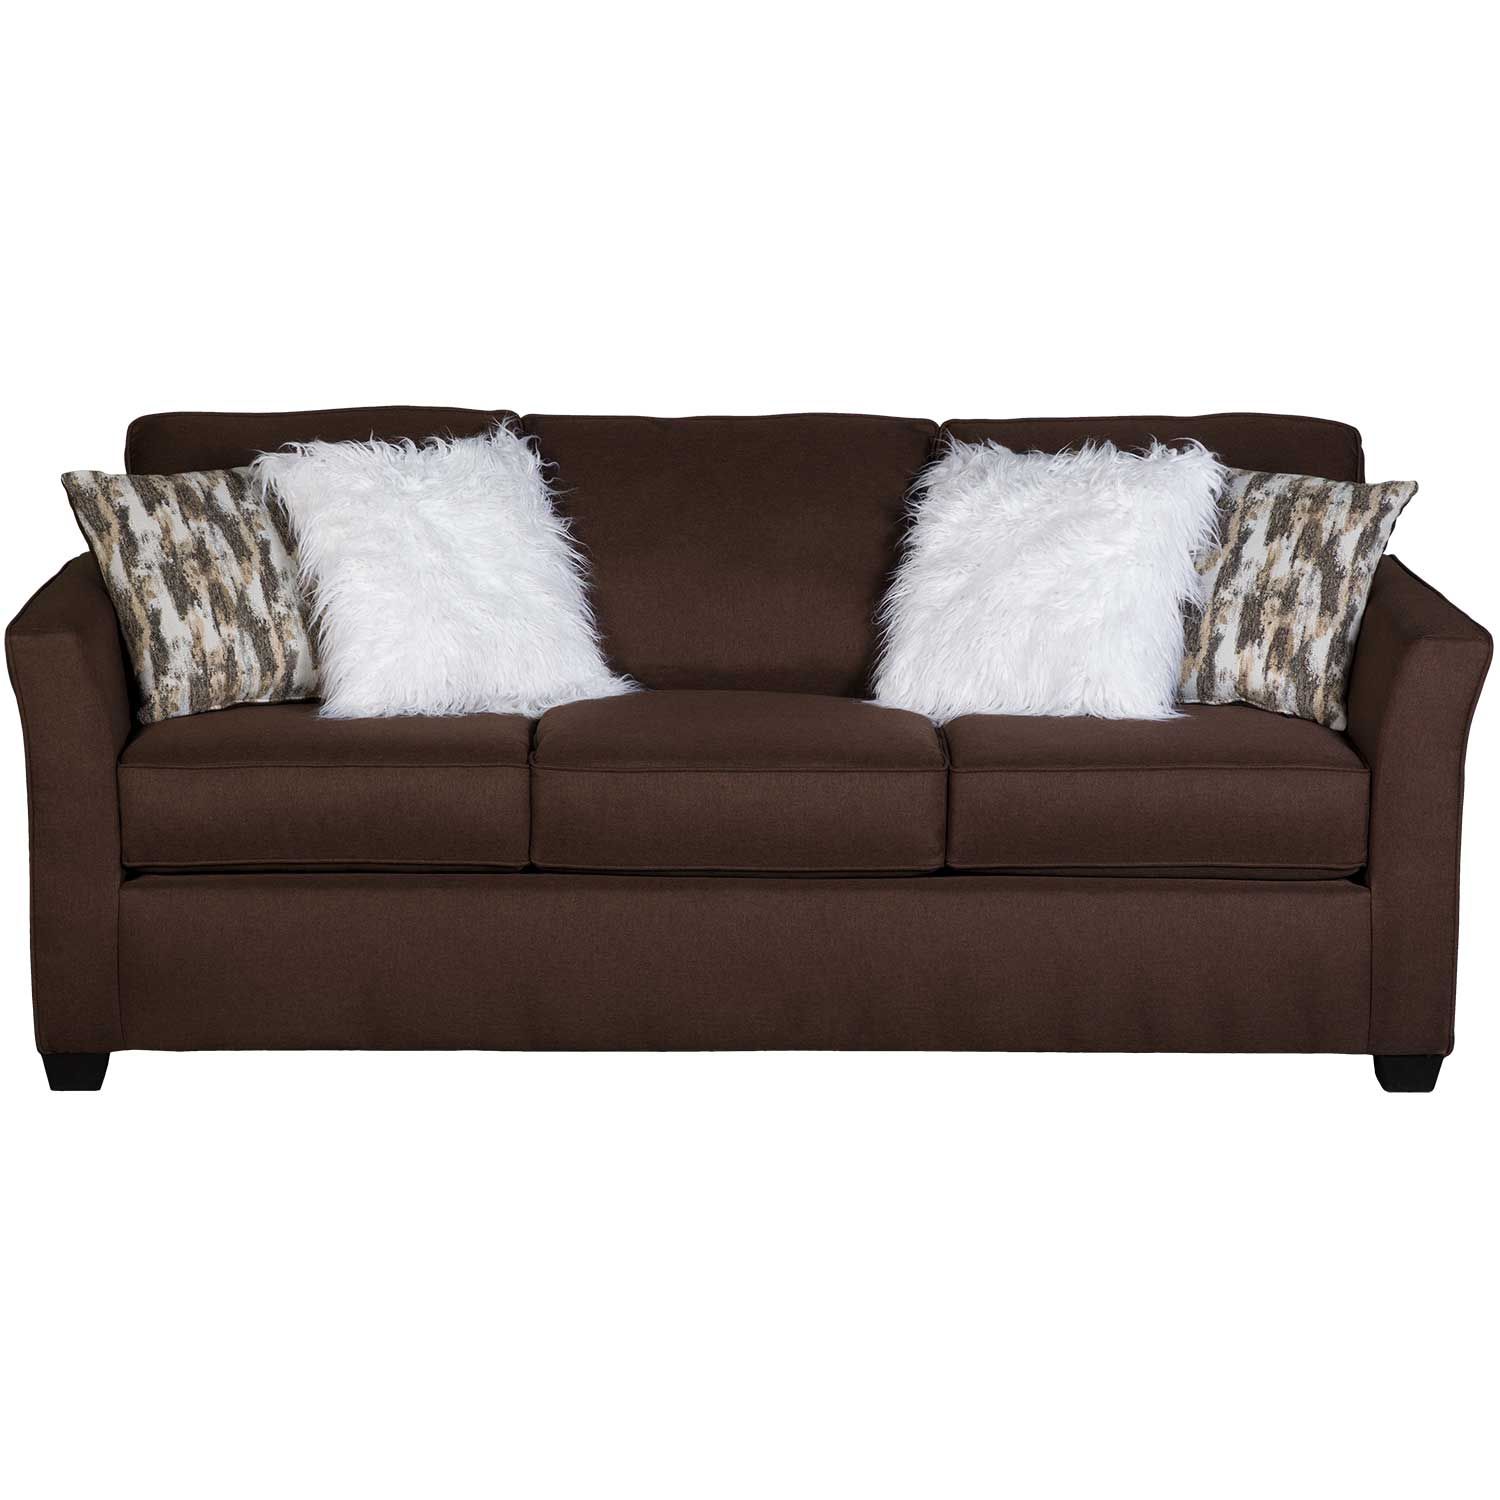 Keegan Chocolate Brown Sofa | Z 1003 | Afw Intended For Sofas In Chocolate Brown (Photo 4 of 15)